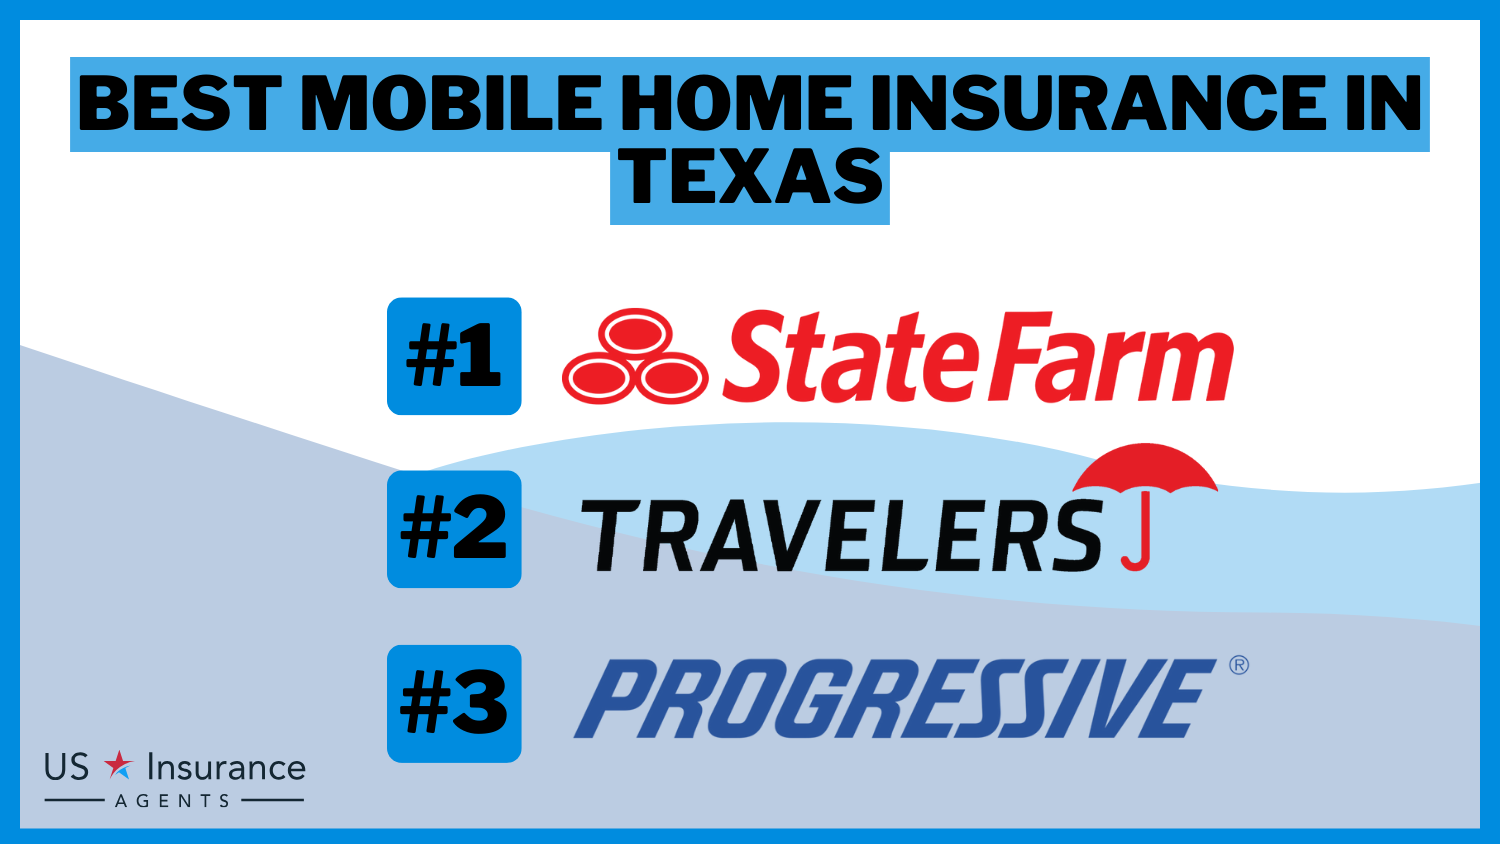 Best Mobile Home Insurance in Texas: State Farm, Travelers, and Progressive